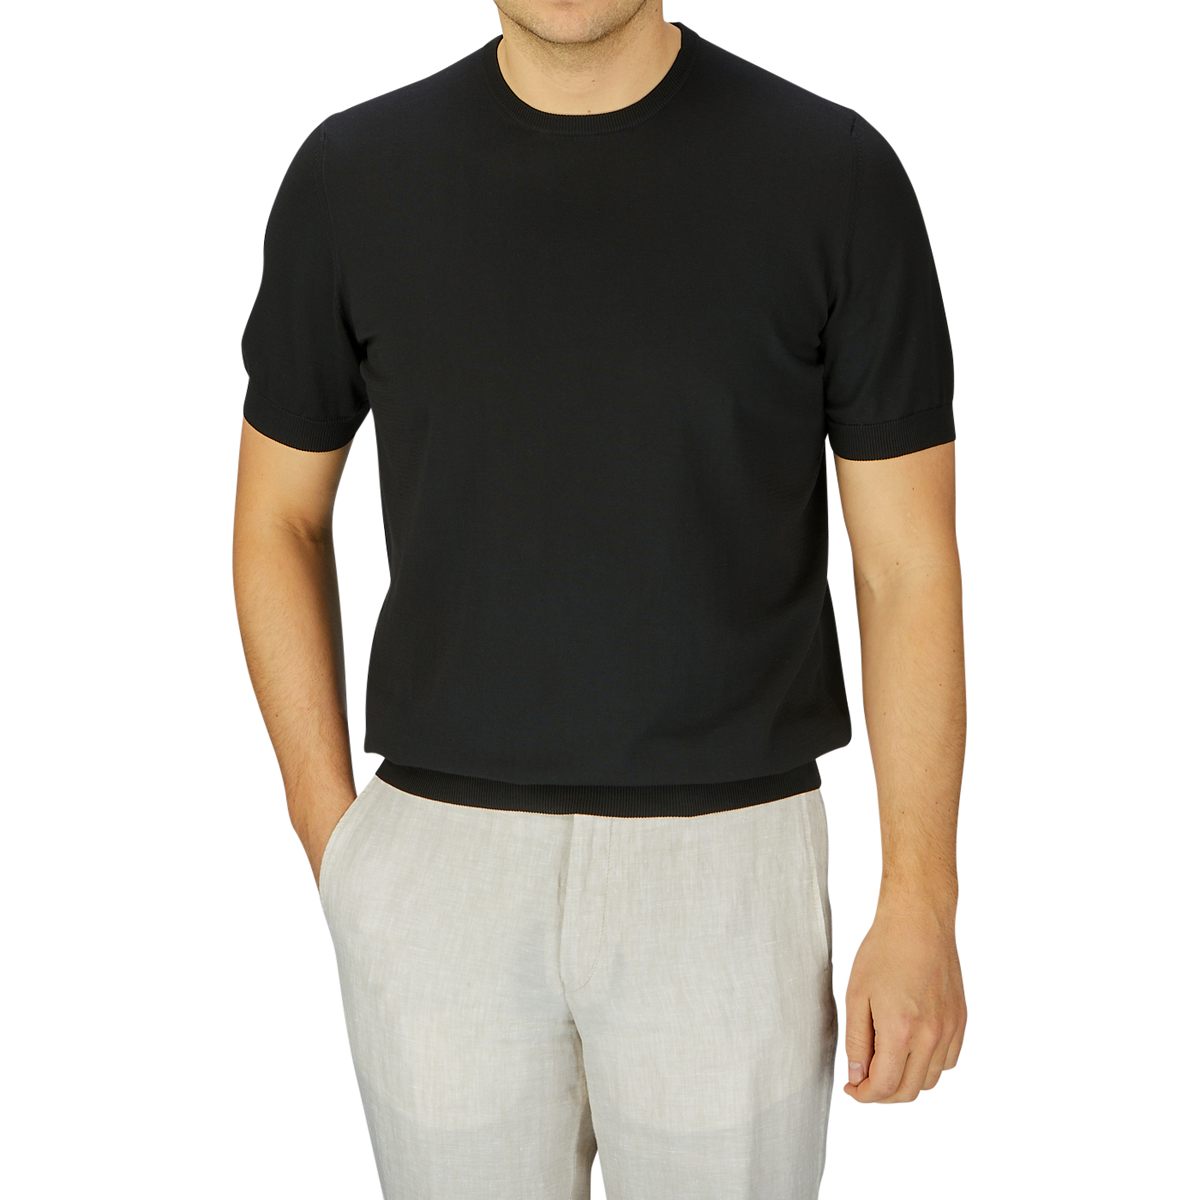 Man wearing a Gran Sasso black organic cotton t-shirt and light beige pants, standing against a grey background, cropped at neck.